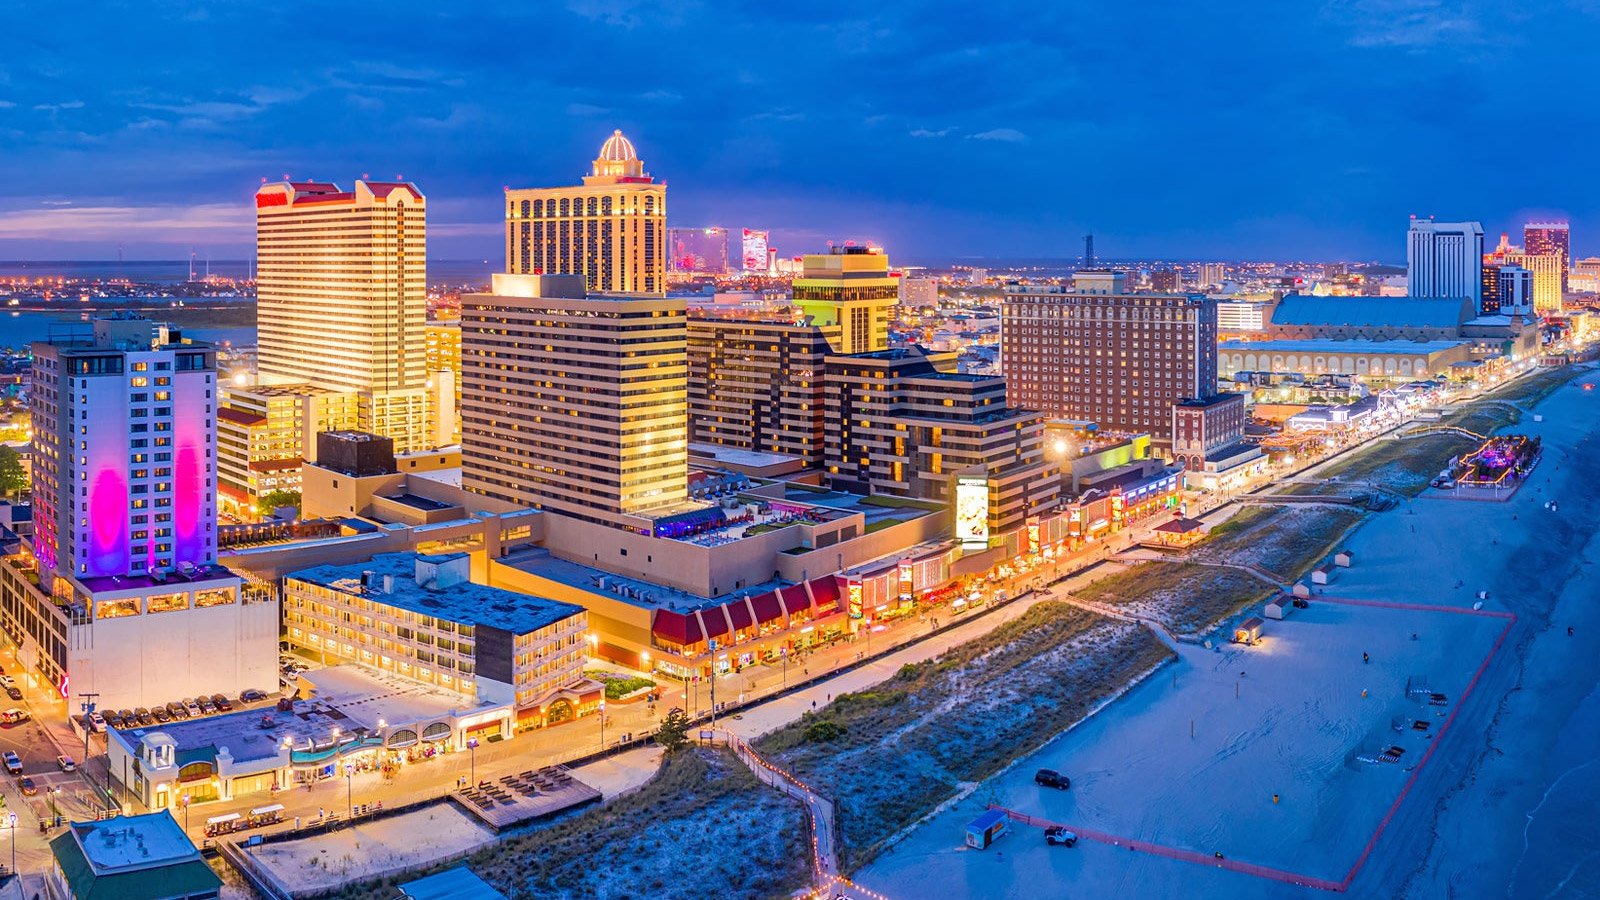 Atlantic City's gambling industry braces for dual threat from New York casinos, Meadowlands project | Yogonet International